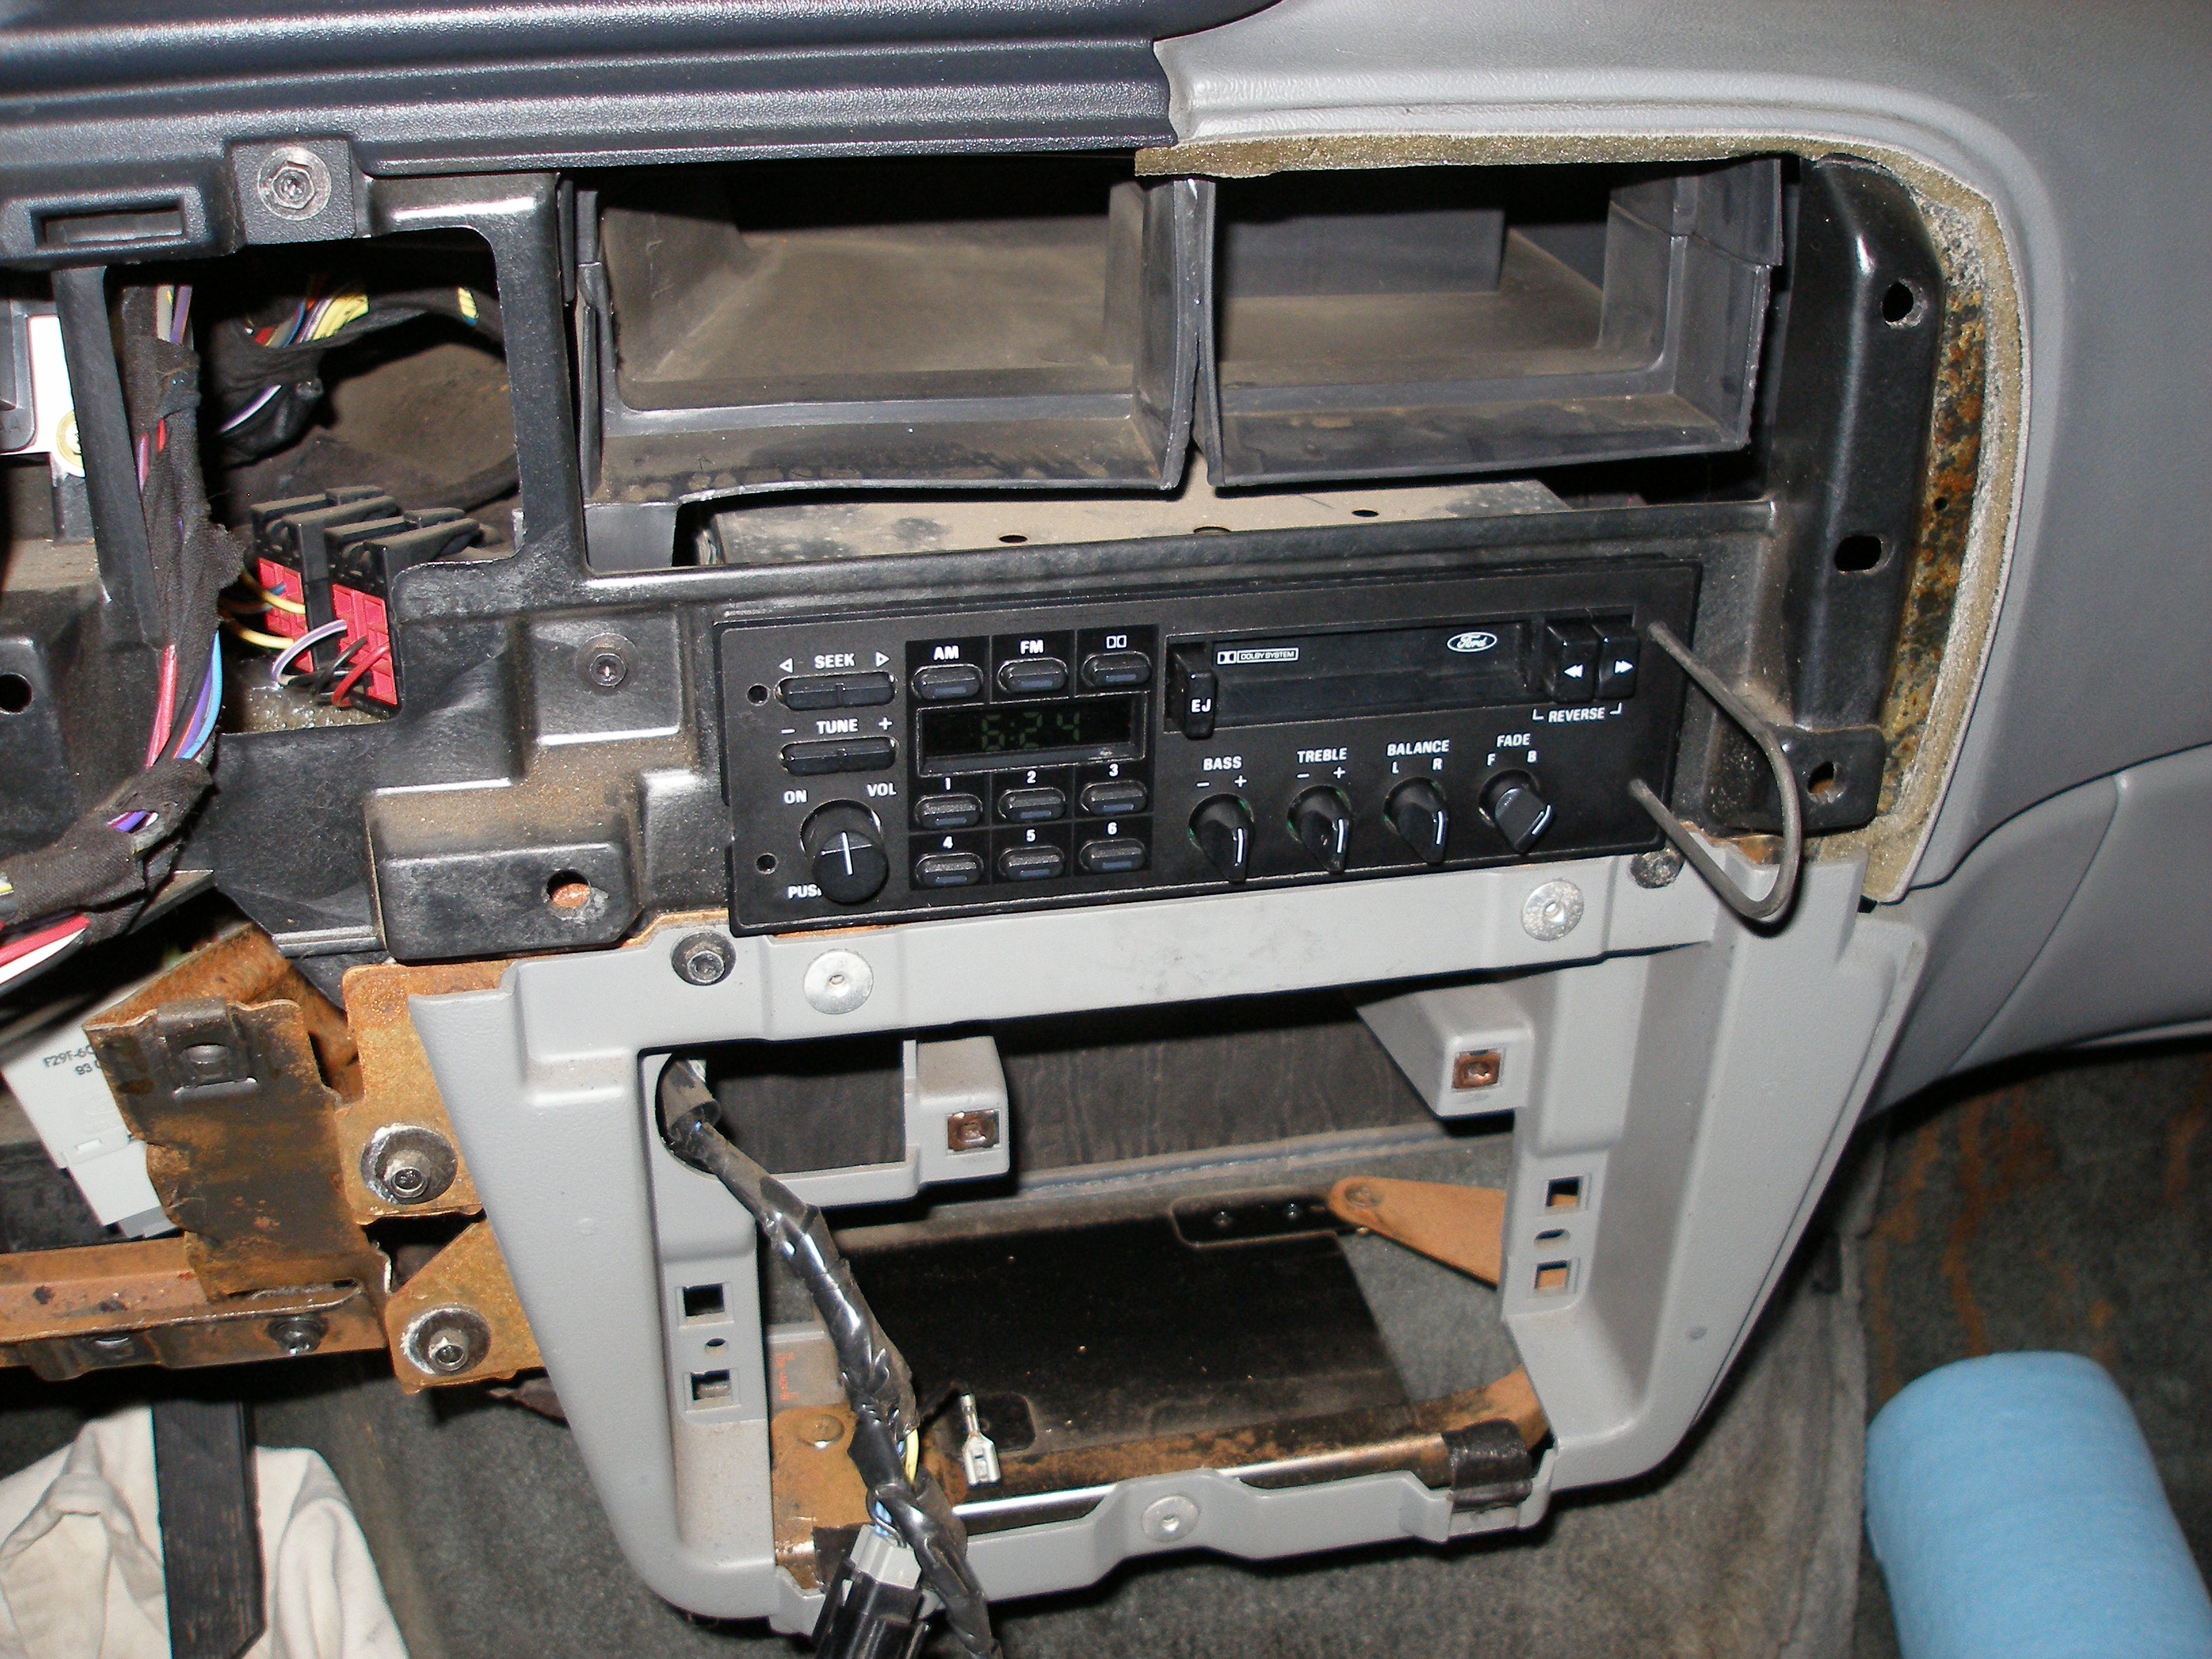 Dark Ford radio display - Ford Truck Enthusiasts Forums 2001 2004 mustang stereo wiring harness 